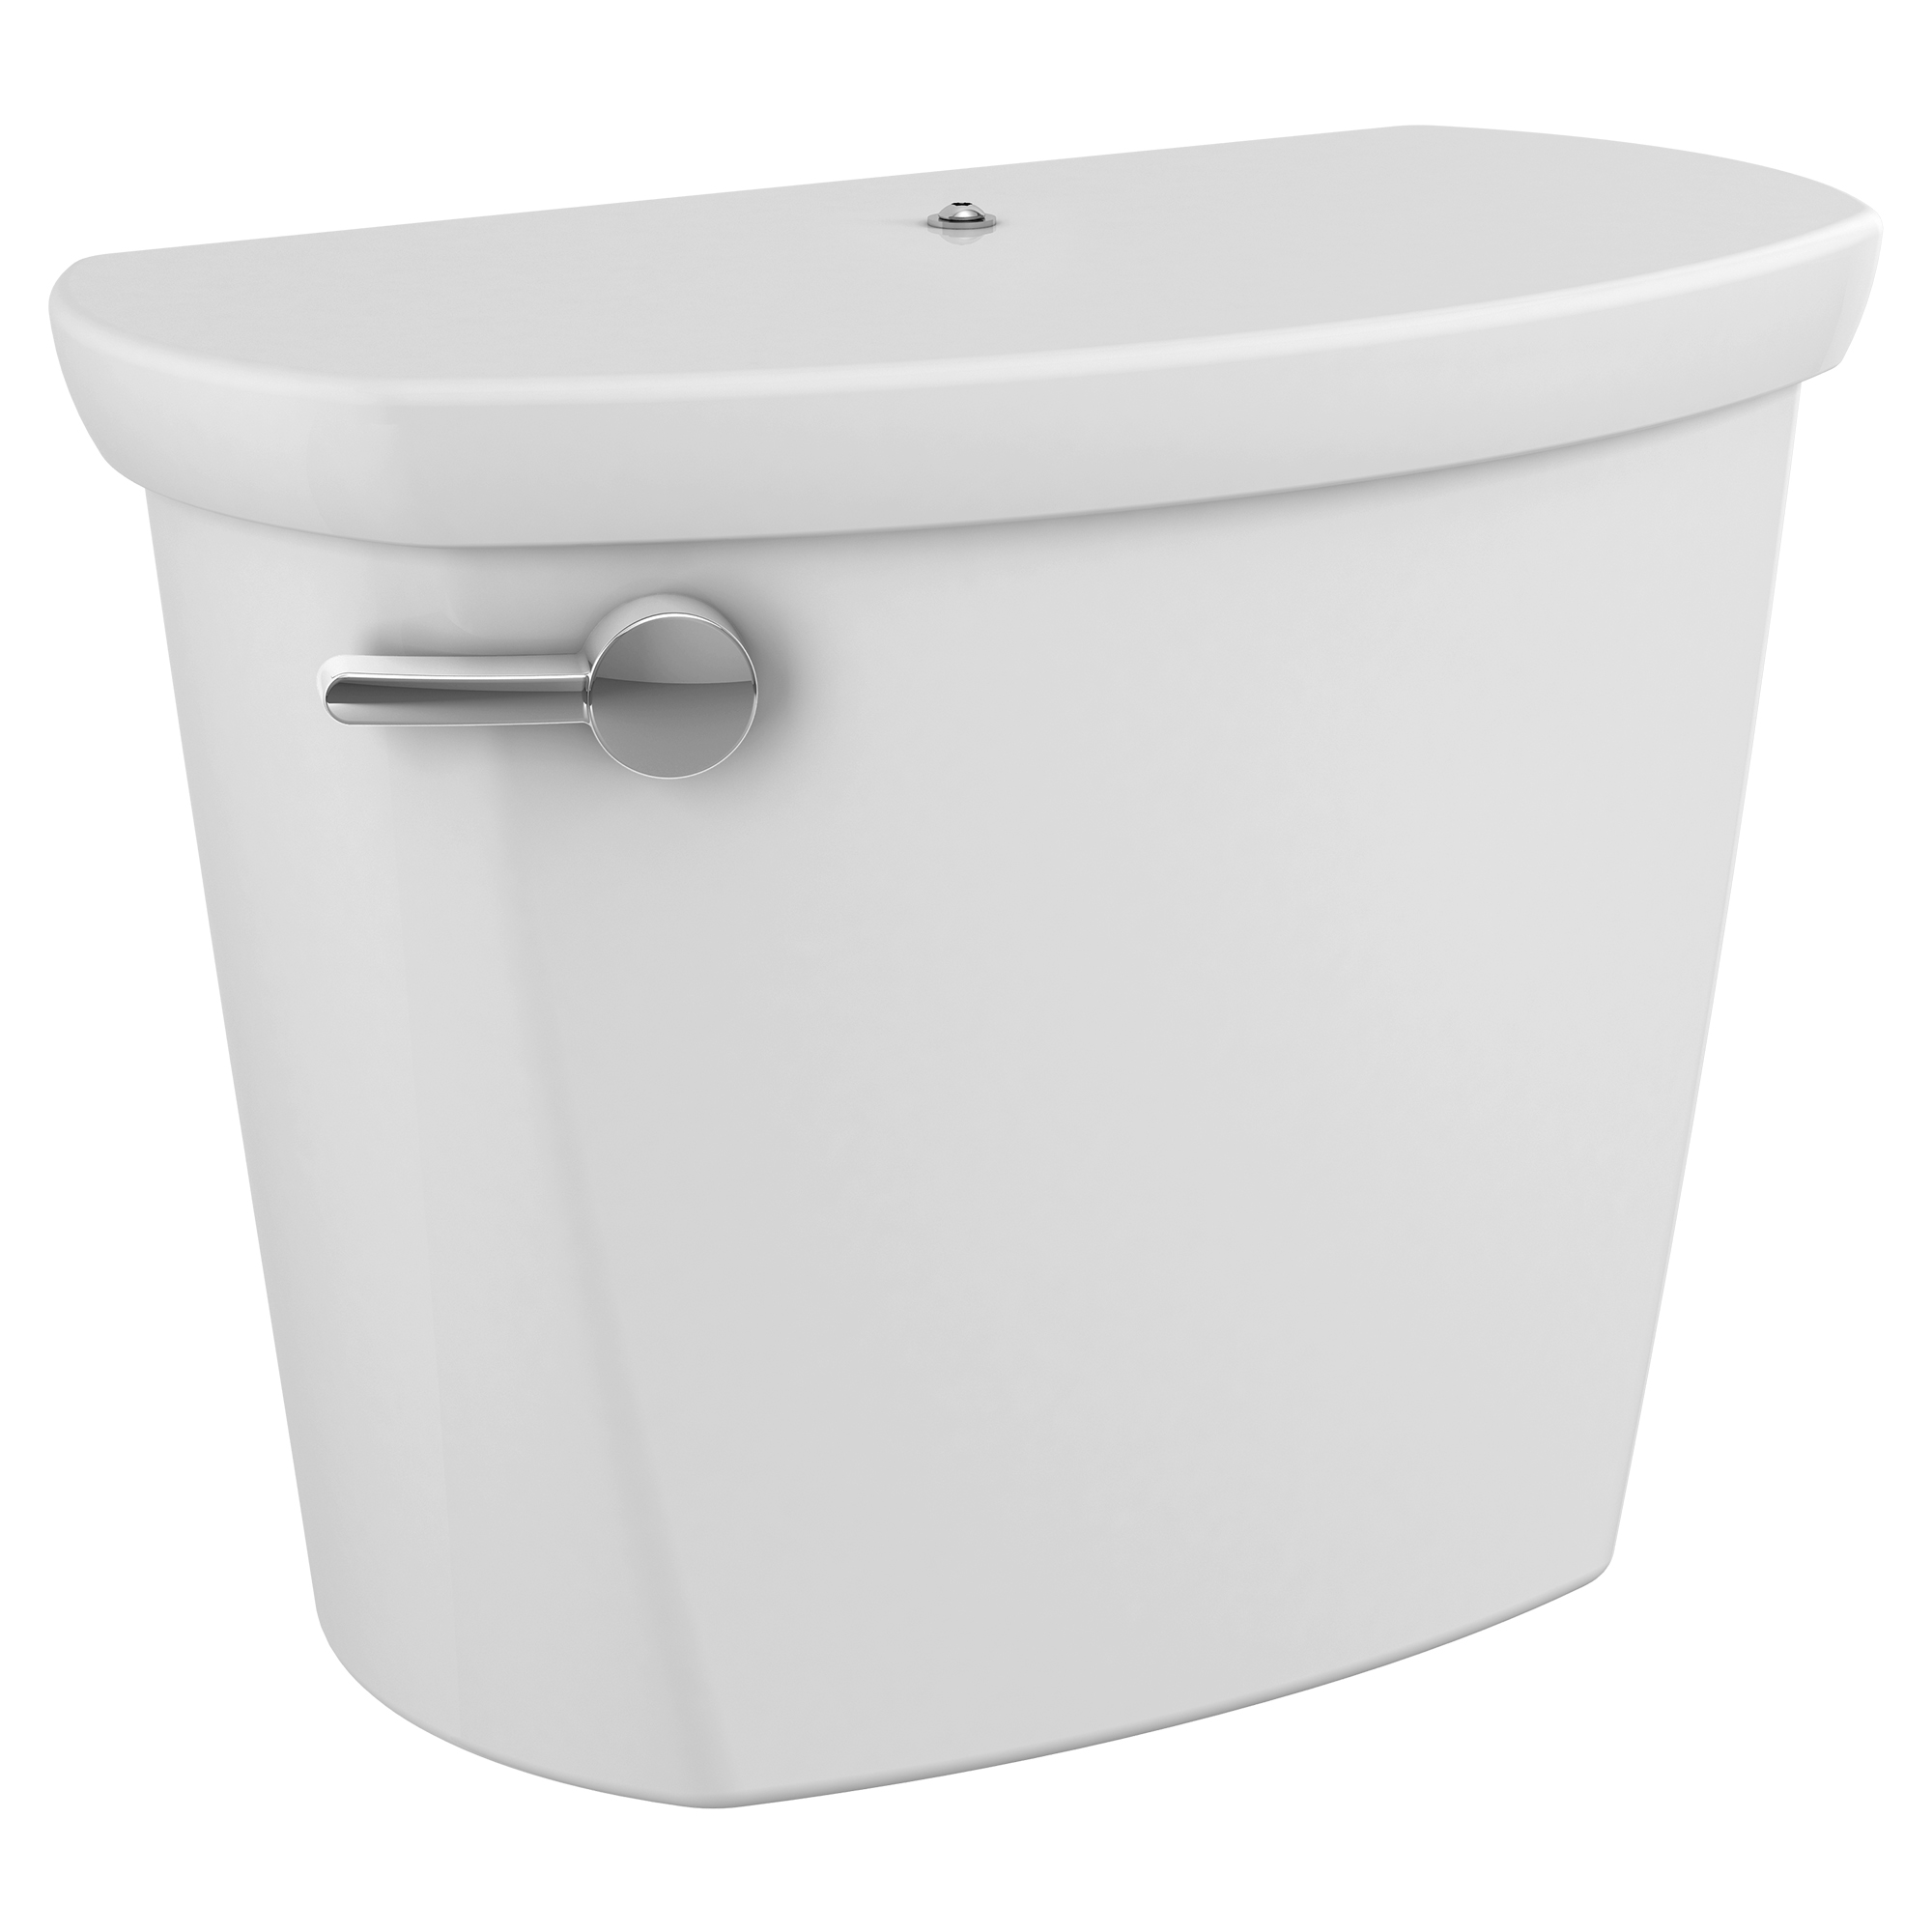 Cadet® PRO 1.6 gpf/6.0 Lpf 12-Inch Toilet Tank with Aquaguard Liner and Tank Cover Locking Device